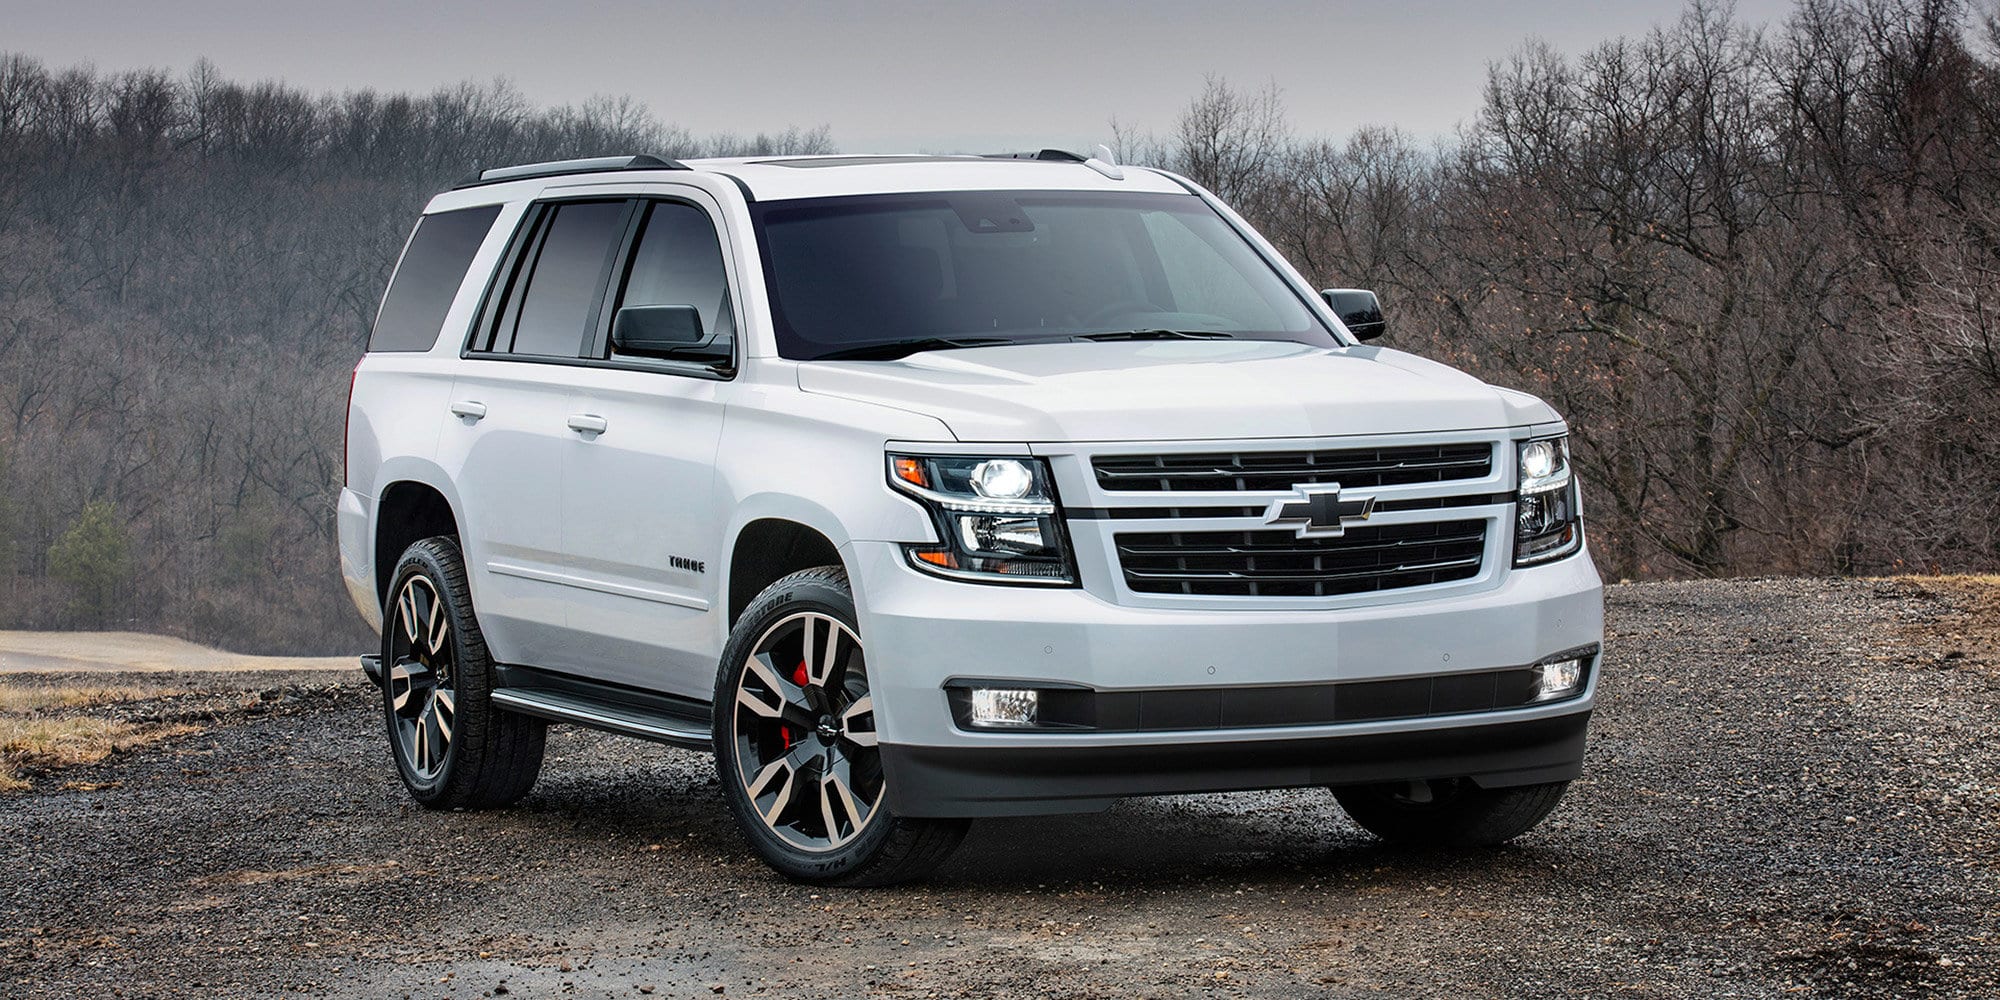 2019 Chevrolet Tahoe white color front side view widescreen near forest 4k uhd wallpaper